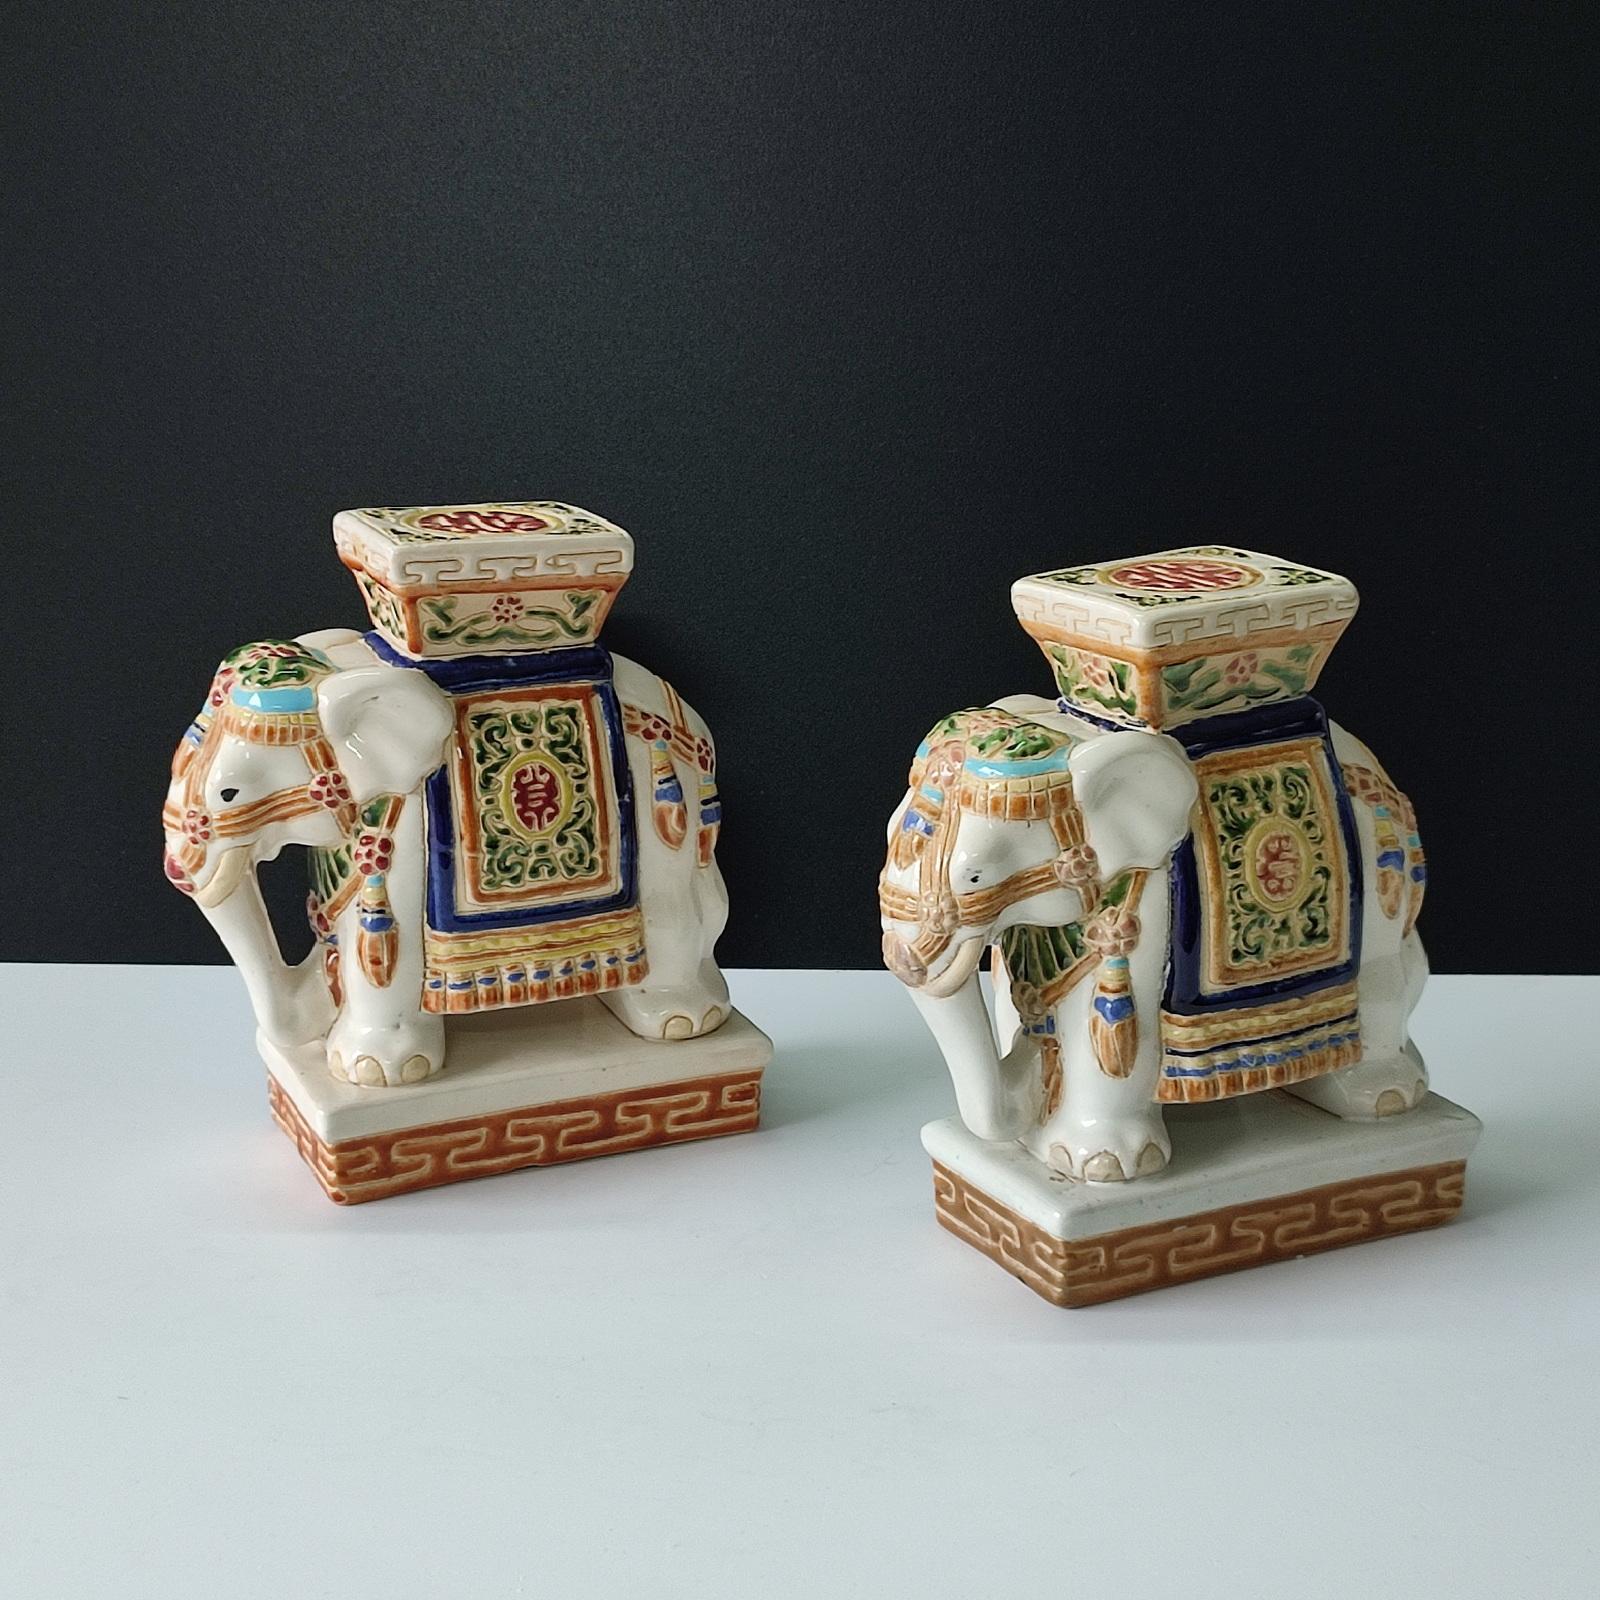 Hollywood Regency Pair of Polychrome Ceramic Elephant Plant Holder, Bookends, Mid 20th Century For Sale